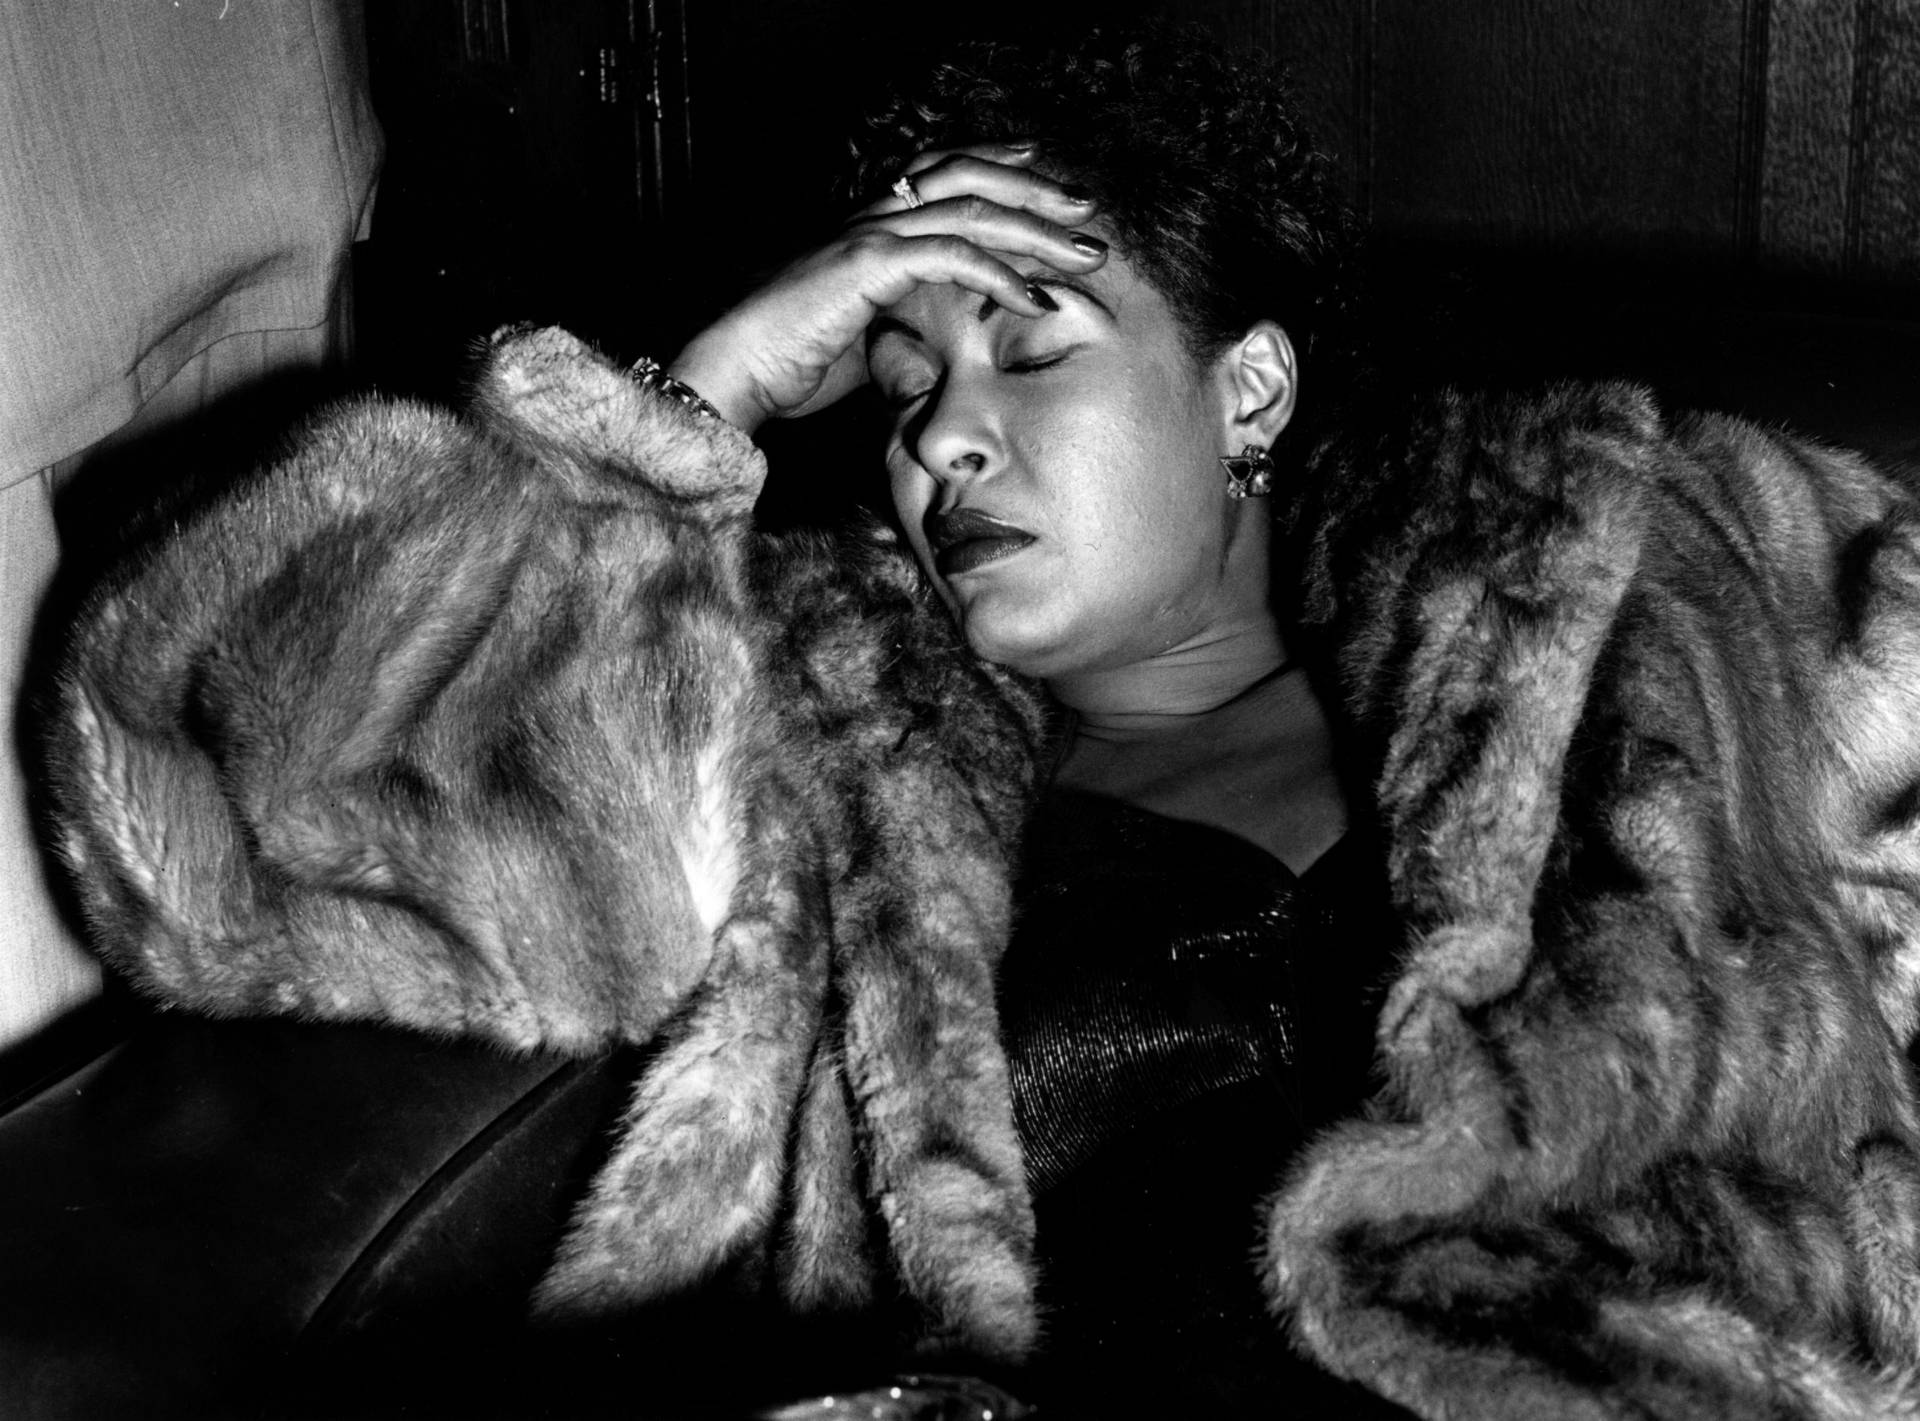 Billie Holiday - The Voice Of Jazz In A Furry Jacket Background